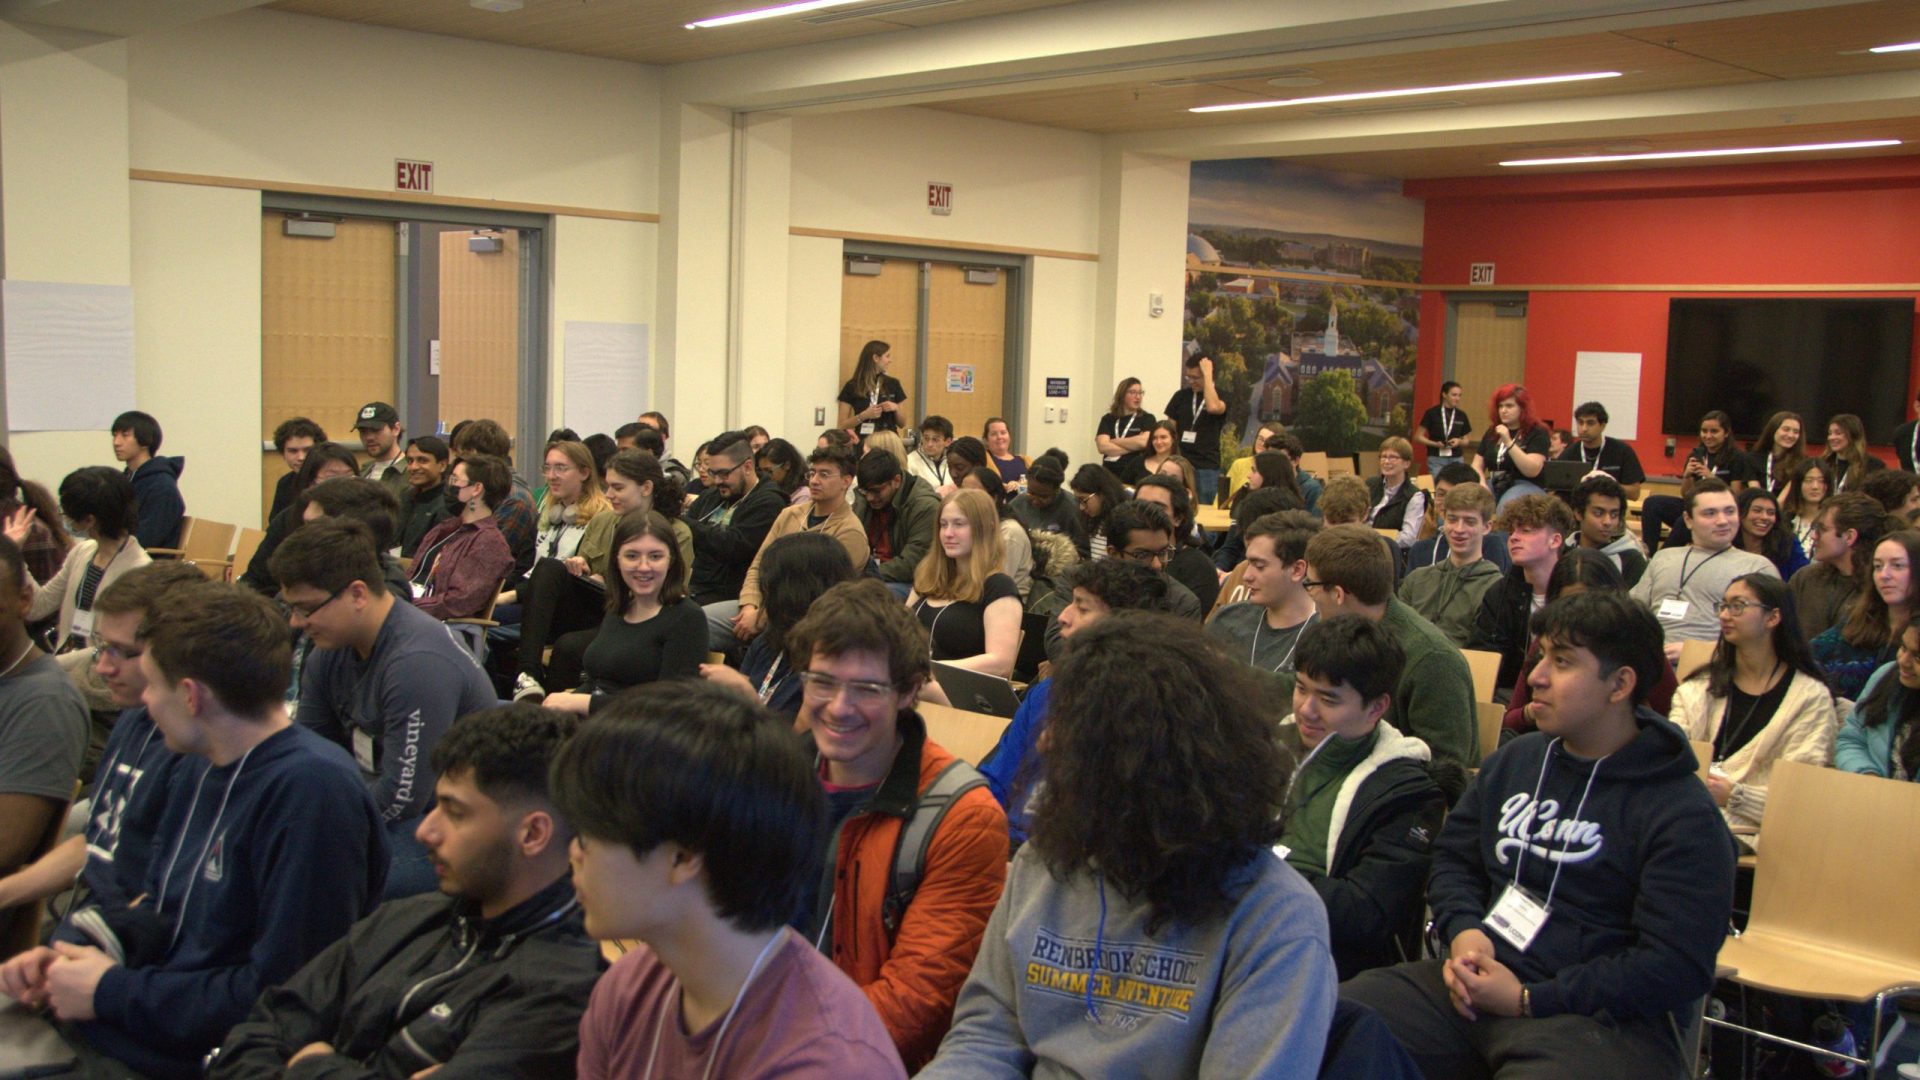 A large crowd fills the Idea Lab room of UConn's Werth Tower Residence Hall!